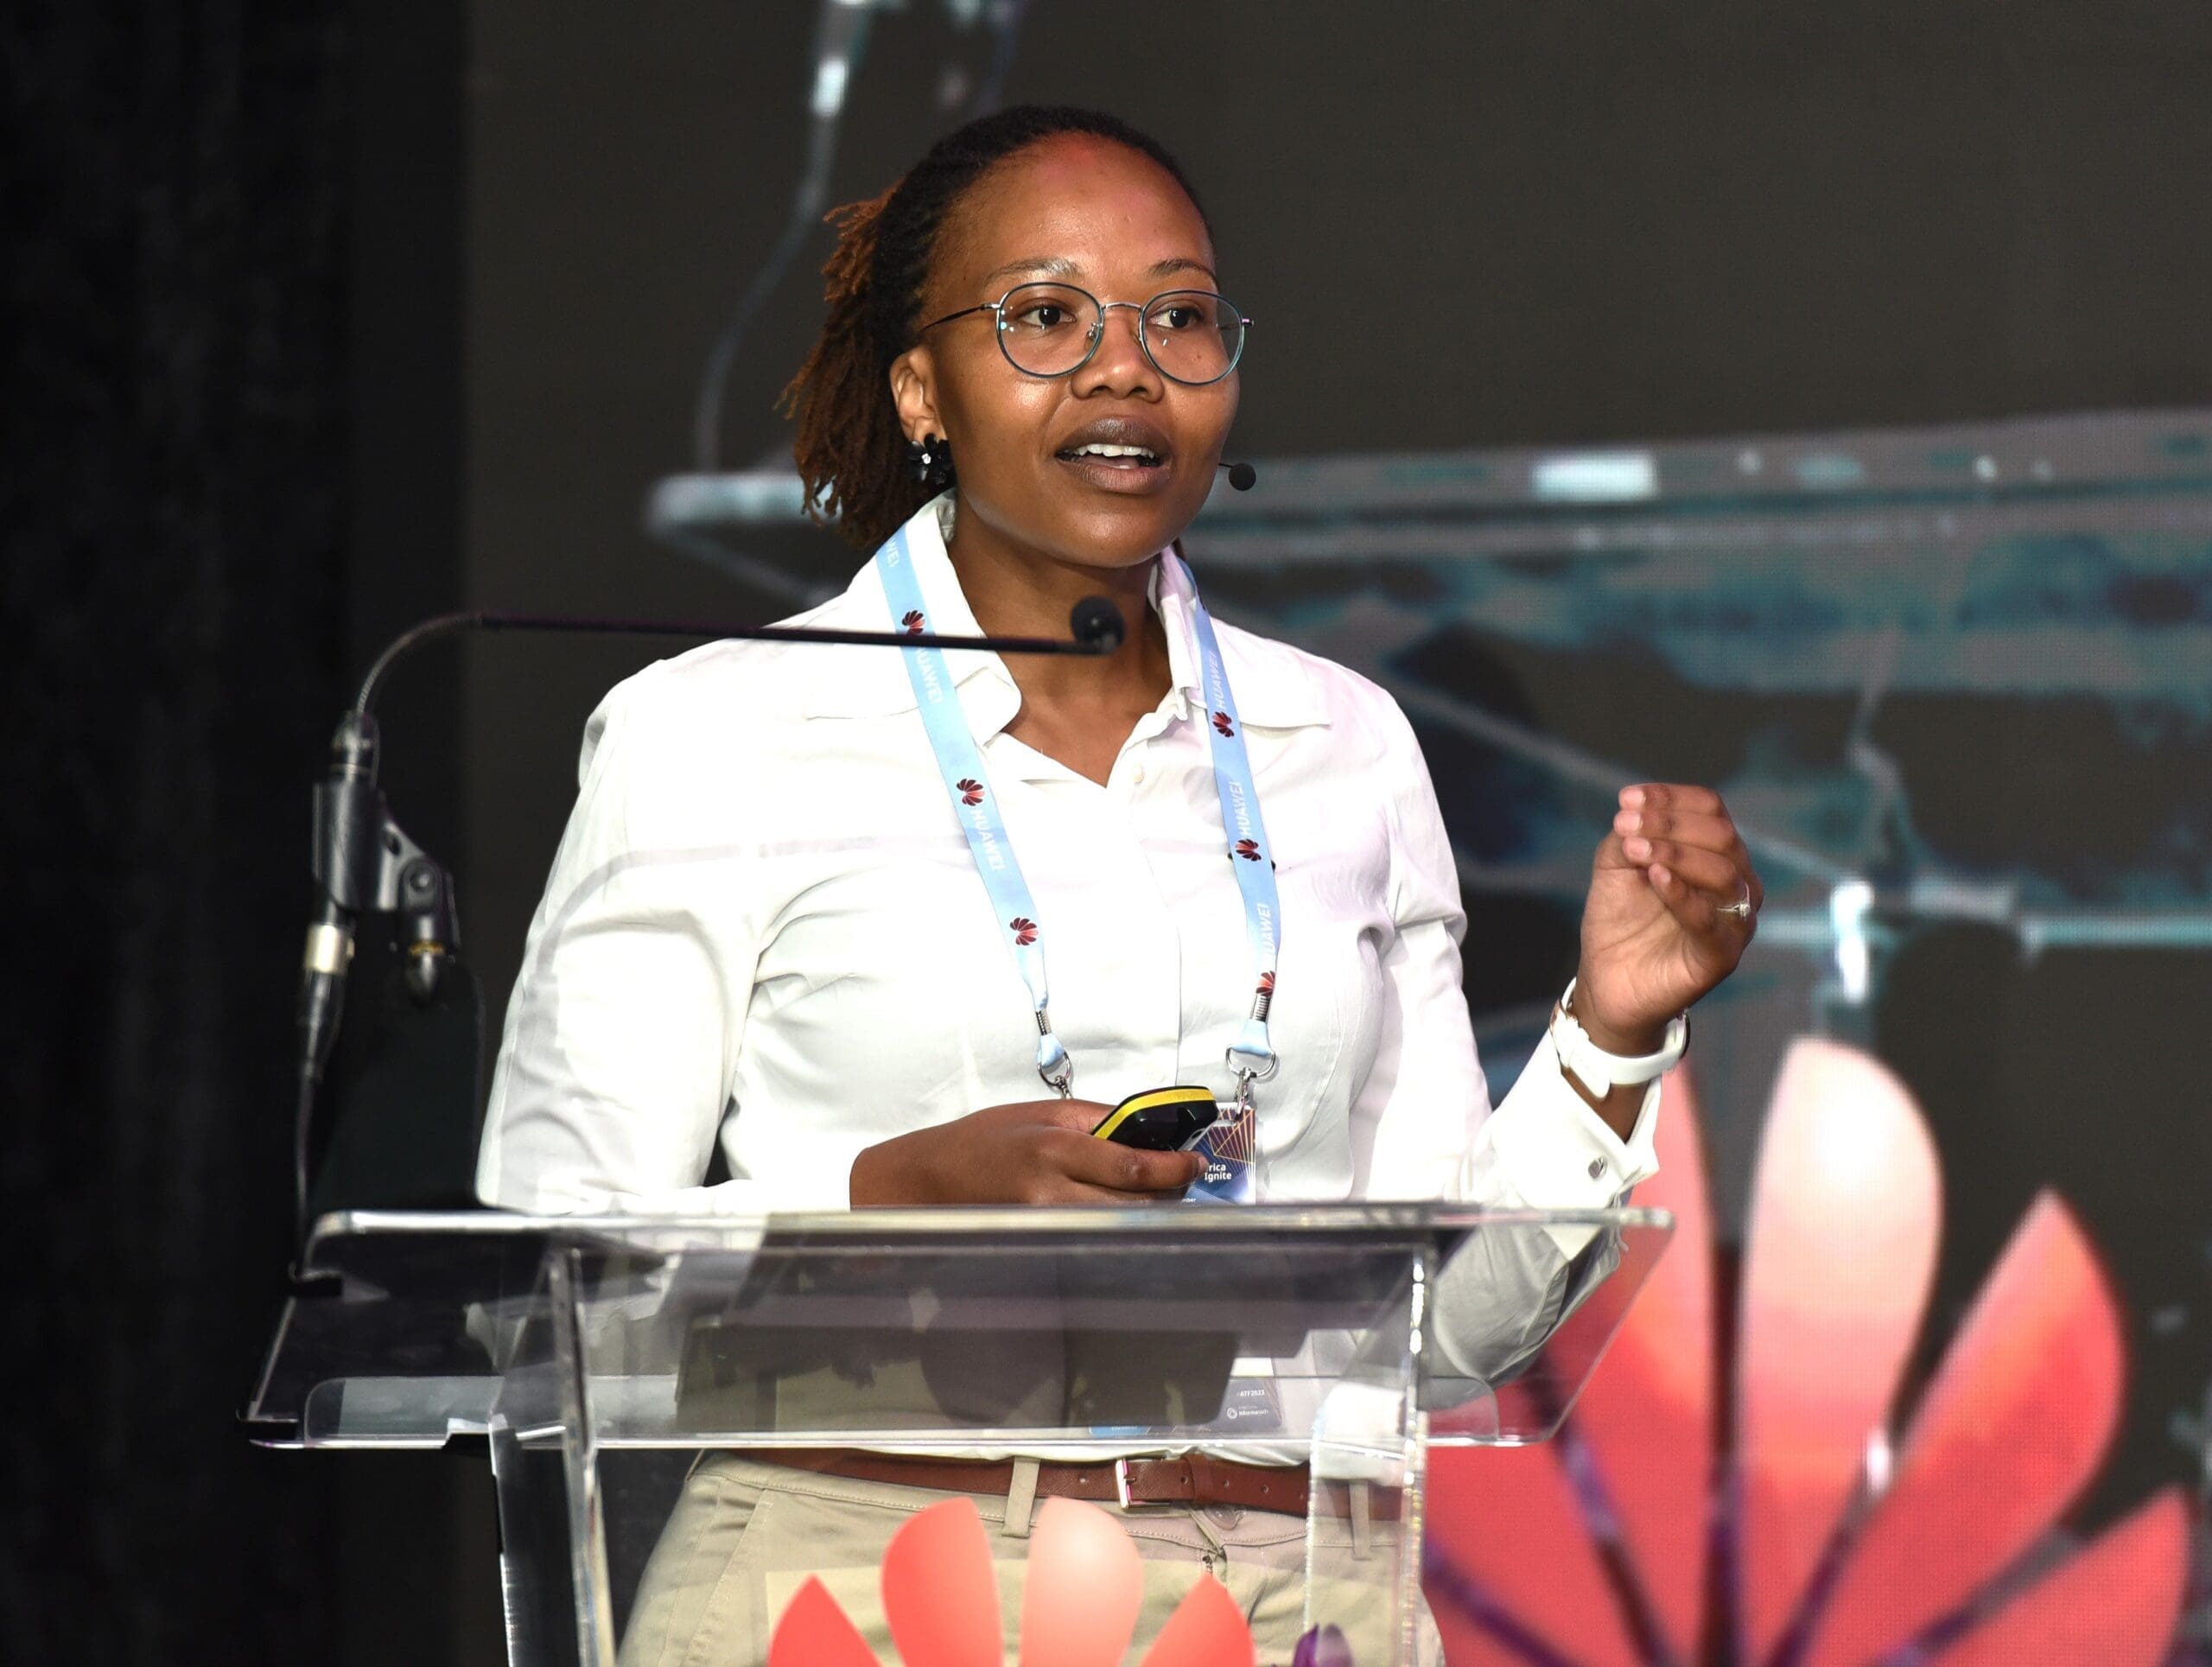 Thabisa Faye, Director and Chairman of the 5G Council Committee of the Independent Communications Authority of South Africa (ICASA)